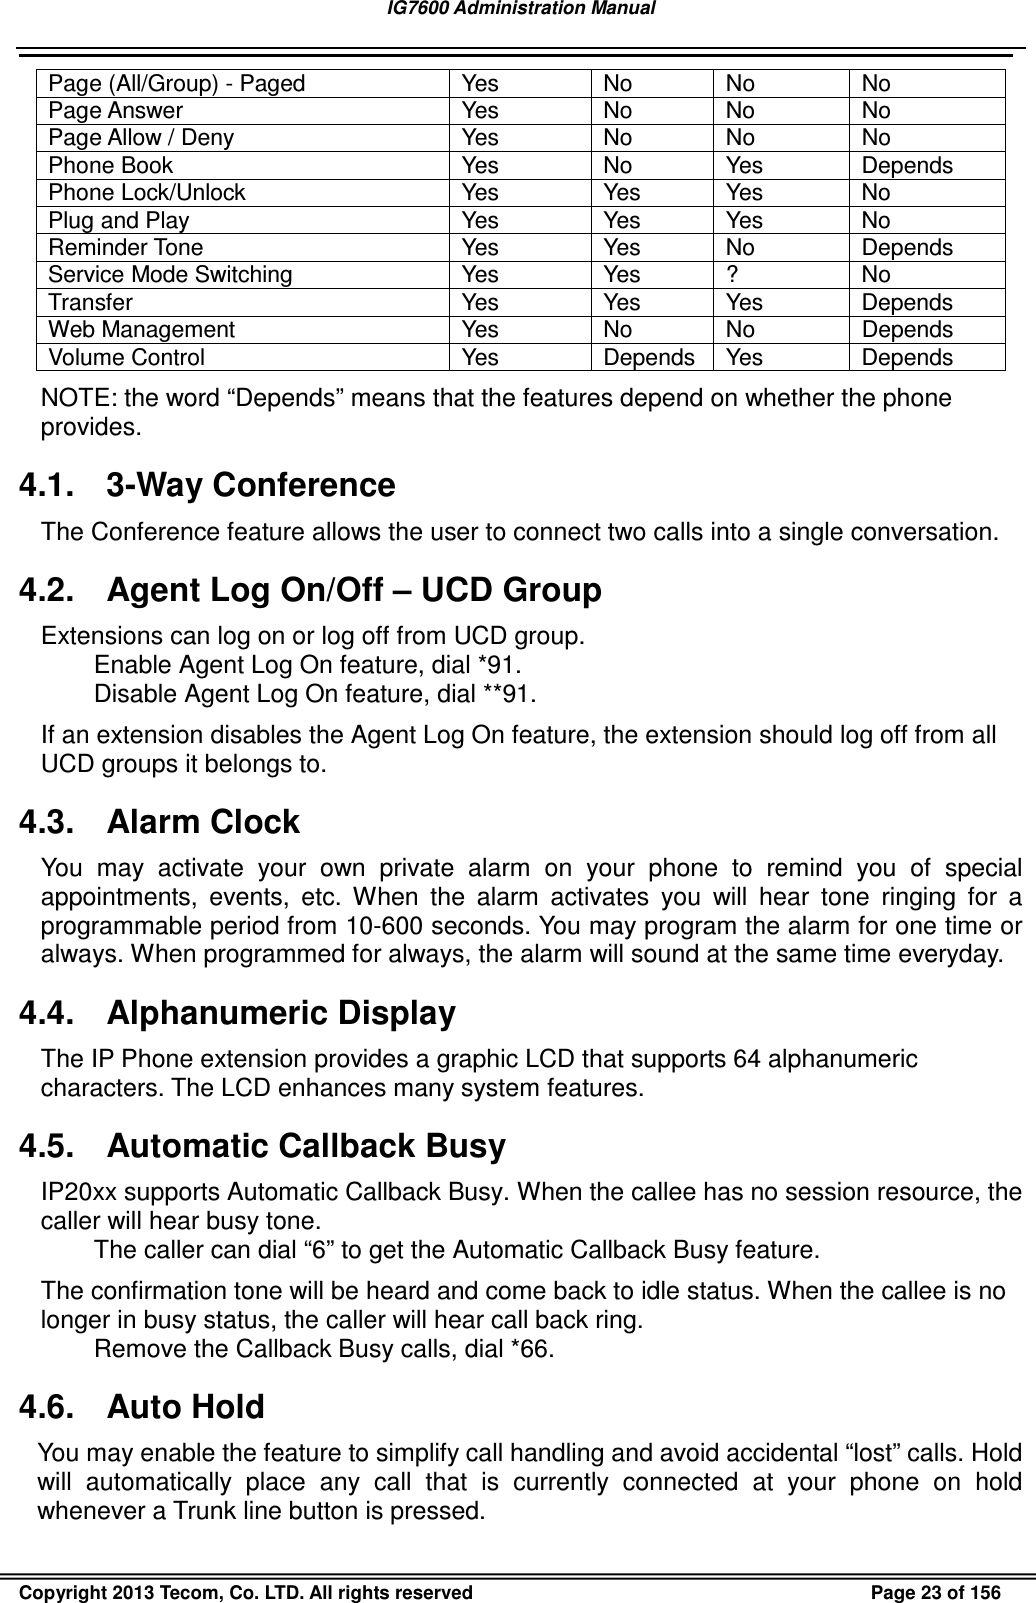 IG7600 Administration Manual                                                                                             Copyright 2013 Tecom, Co. LTD. All rights reserved  Page 23 of 156 Page (All/Group) - Paged  Yes  No  No  No Page Answer  Yes  No  No  No Page Allow / Deny  Yes  No  No  No Phone Book  Yes  No  Yes  Depends Phone Lock/Unlock  Yes  Yes  Yes  No Plug and Play  Yes  Yes  Yes  No Reminder Tone  Yes  Yes  No  Depends Service Mode Switching  Yes  Yes  ?  No Transfer  Yes  Yes  Yes  Depends Web Management  Yes  No  No  Depends Volume Control  Yes  Depends Yes  Depends NOTE: the word “Depends” means that the features depend on whether the phone provides. 4.1.  3-Way Conference The Conference feature allows the user to connect two calls into a single conversation. 4.2.  Agent Log On/Off – UCD Group Extensions can log on or log off from UCD group. Enable Agent Log On feature, dial *91. Disable Agent Log On feature, dial **91. If an extension disables the Agent Log On feature, the extension should log off from all UCD groups it belongs to. 4.3.  Alarm Clock You  may  activate  your  own  private  alarm  on  your  phone  to  remind  you  of  special appointments,  events,  etc.  When  the  alarm  activates  you  will  hear  tone  ringing  for  a programmable period from 10-600 seconds. You may program the alarm for one time or always. When programmed for always, the alarm will sound at the same time everyday. 4.4.  Alphanumeric Display The IP Phone extension provides a graphic LCD that supports 64 alphanumeric characters. The LCD enhances many system features. 4.5.  Automatic Callback Busy IP20xx supports Automatic Callback Busy. When the callee has no session resource, the caller will hear busy tone.   The caller can dial “6” to get the Automatic Callback Busy feature.   The confirmation tone will be heard and come back to idle status. When the callee is no longer in busy status, the caller will hear call back ring. Remove the Callback Busy calls, dial *66. 4.6.  Auto Hold You may enable the feature to simplify call handling and avoid accidental “lost” calls. Hold will  automatically  place  any  call  that  is  currently  connected  at  your  phone  on  hold whenever a Trunk line button is pressed. 